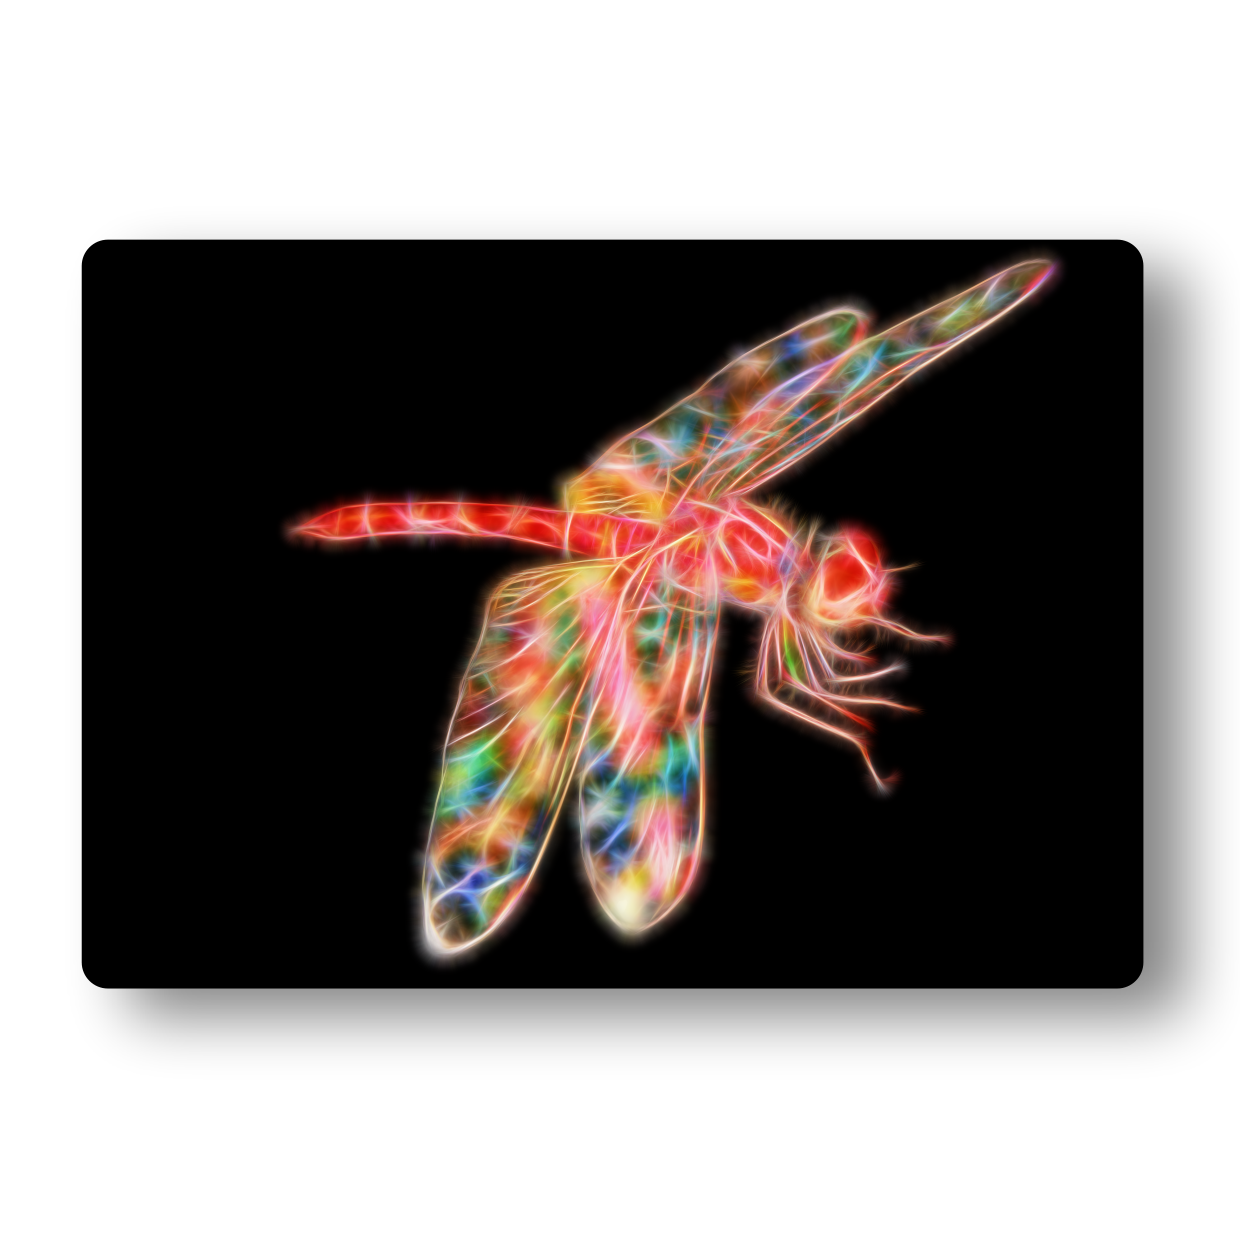 Dragonfly Metal Wall Plaque